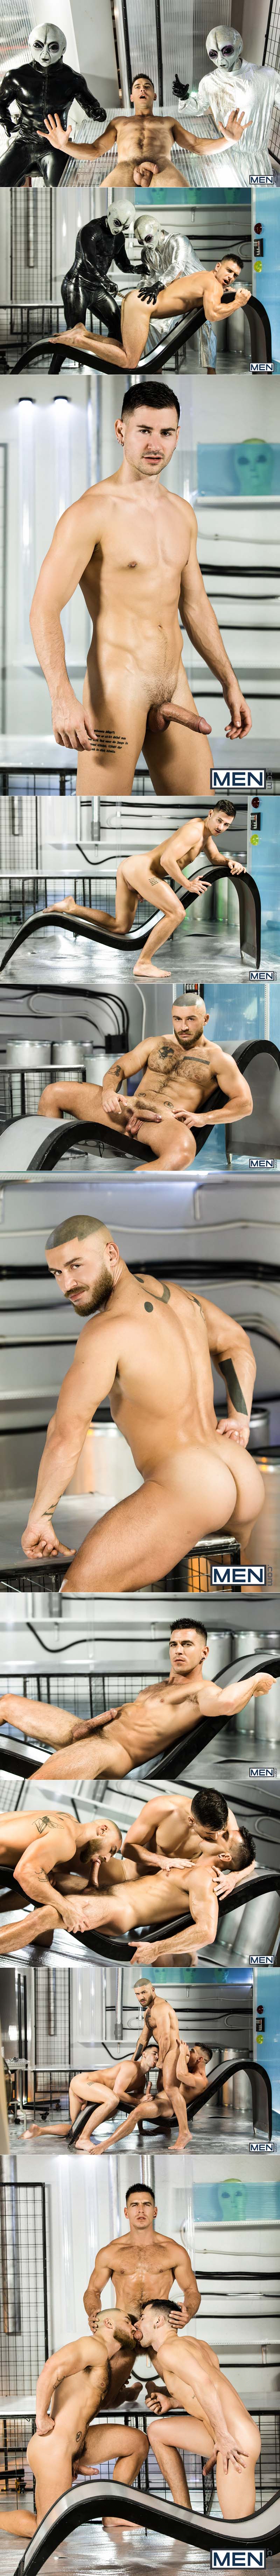 Anal Abduction (Paddy O'Brian, Lukas Daken and François Sagat) at Drill My Hole